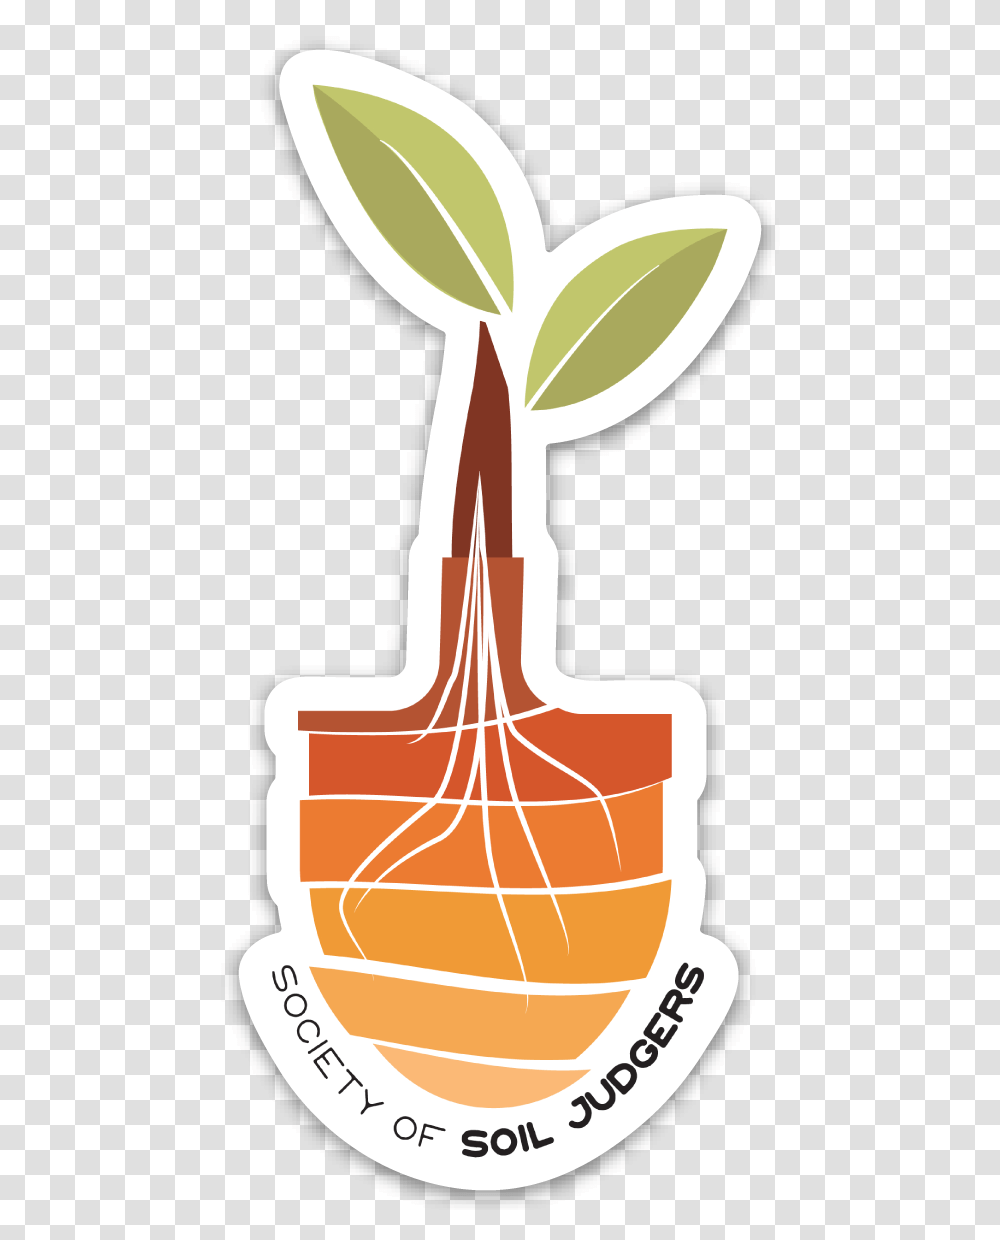 Society Of Soil Judgers Official Logo Sticker Transparent Png